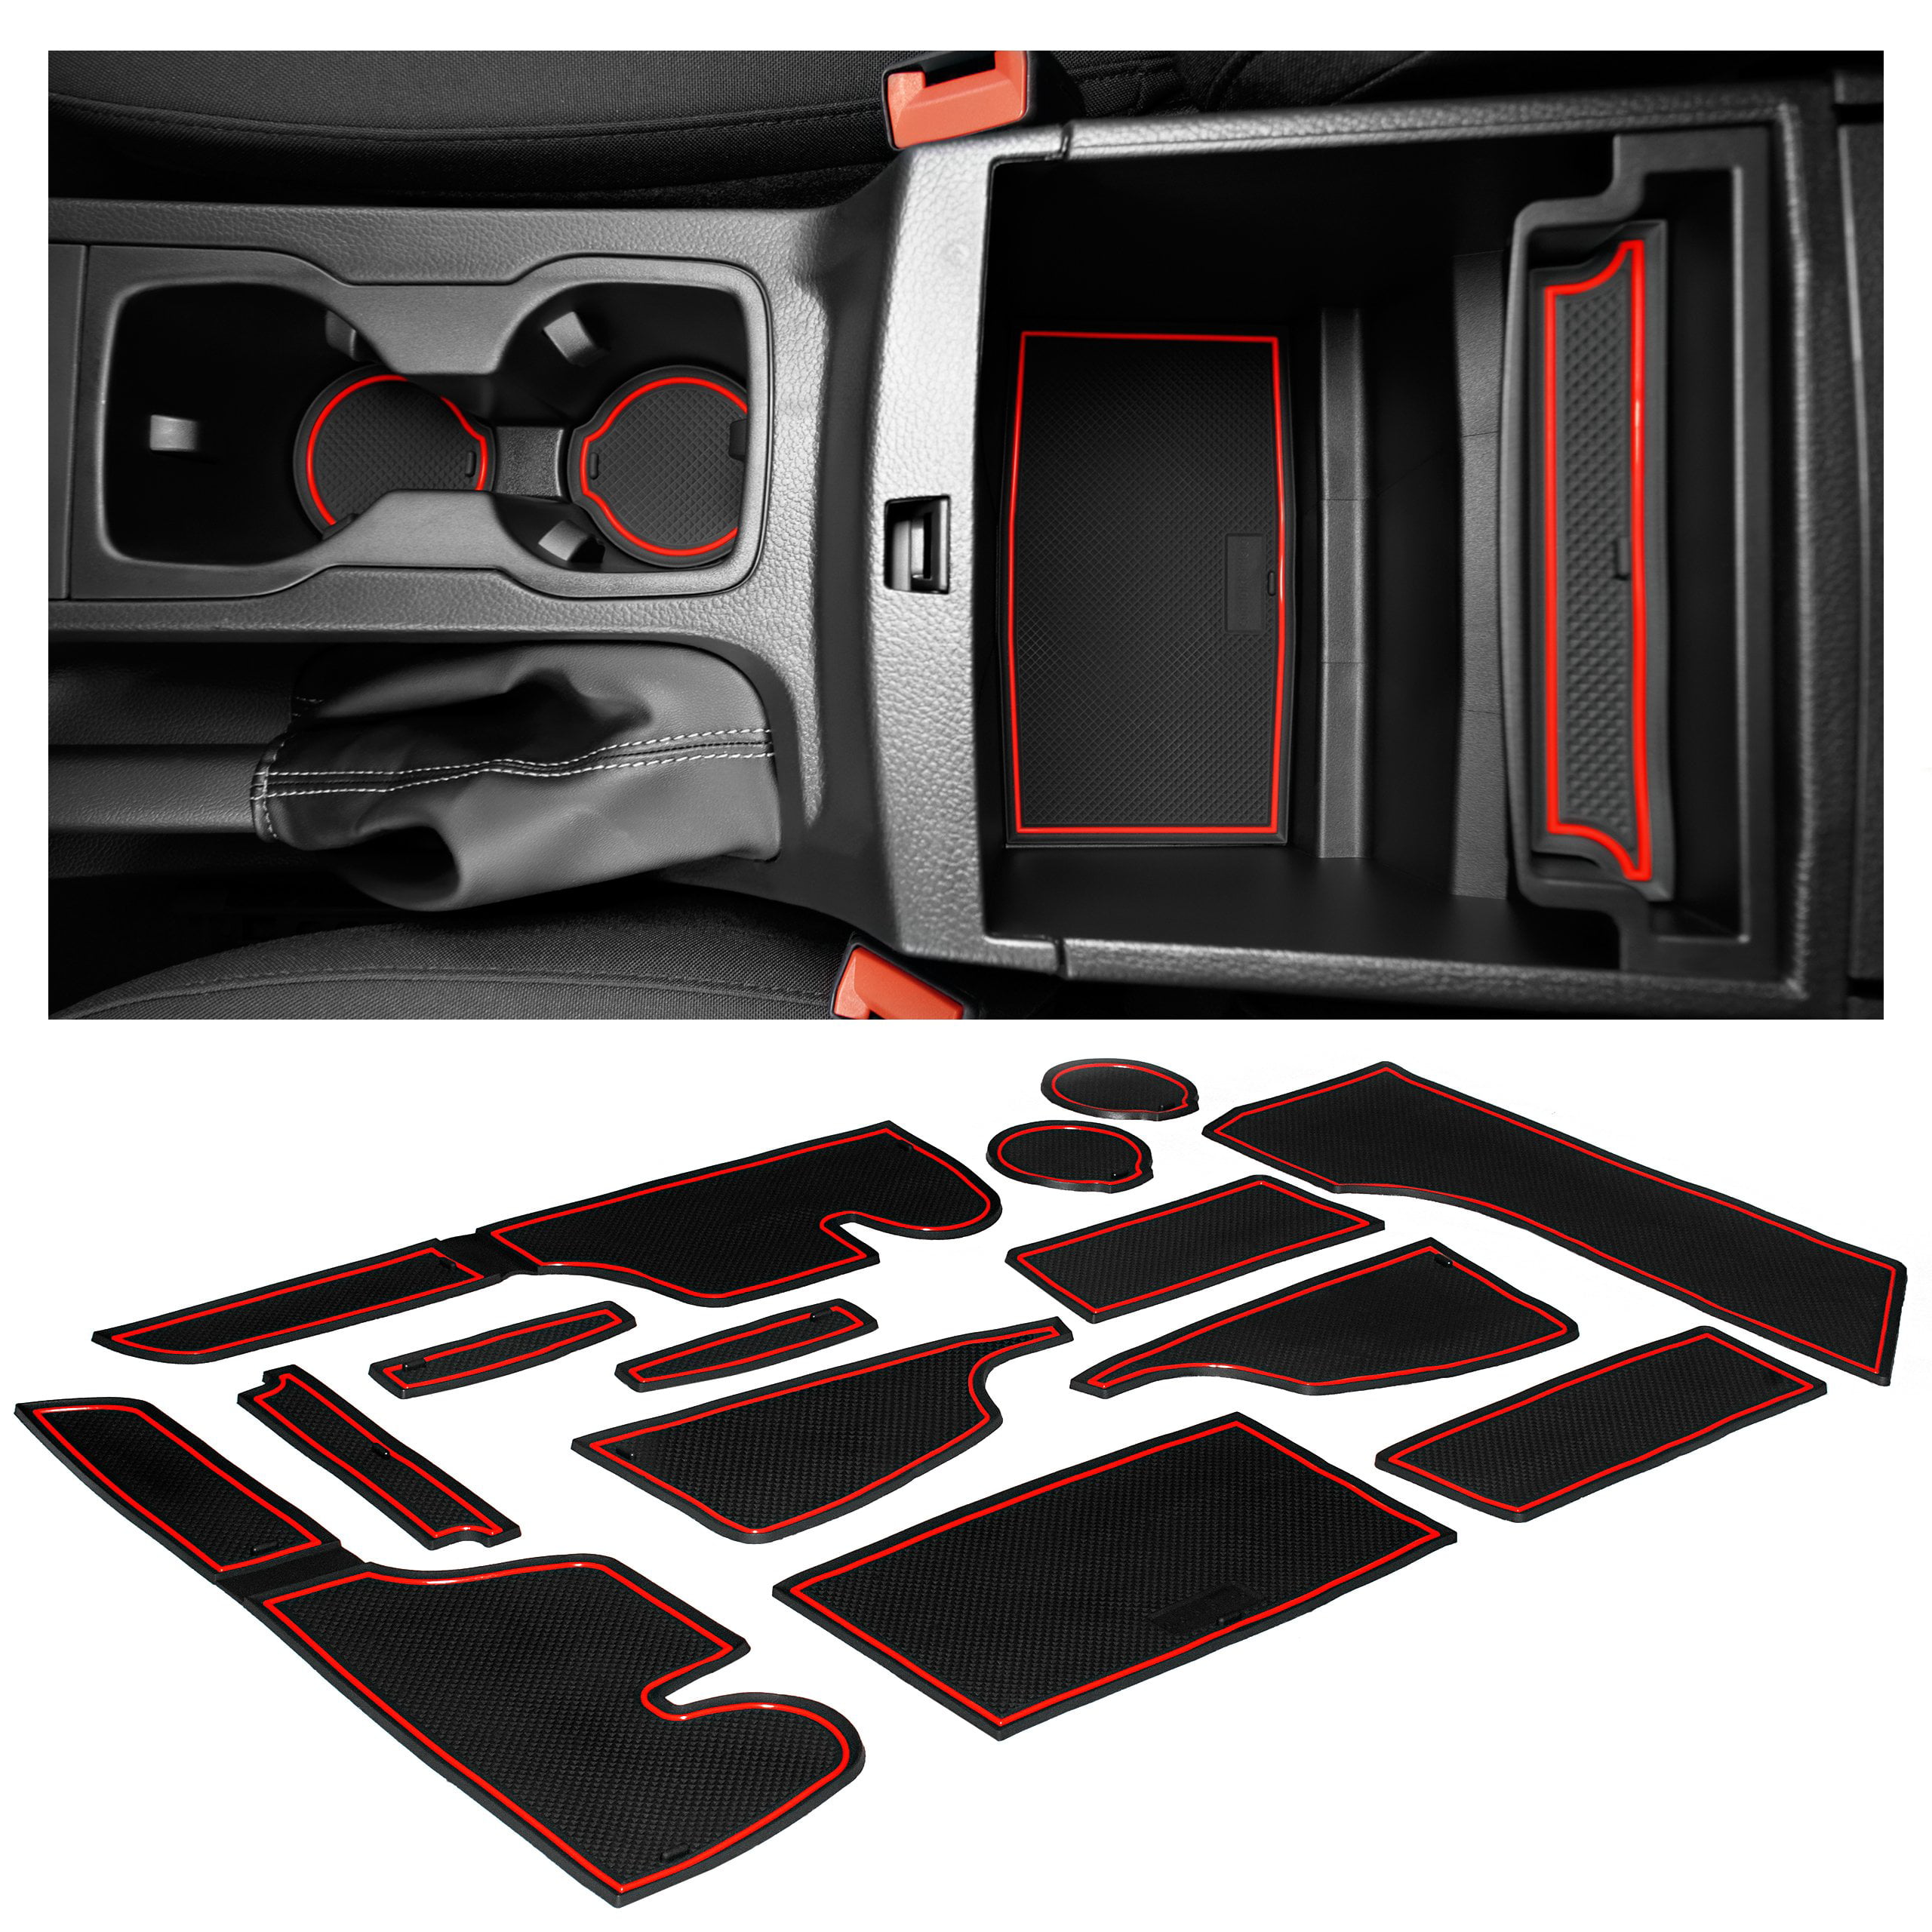 Red Trim, SuperCrew, 5 Passenger 13pcs/Set Auovo Door Mats for Ford Ranger Accessories 2019 2020 2021 Interior Custom Fit Door Compartment Cup Holder Center Console Anti Dust Mats Inserts